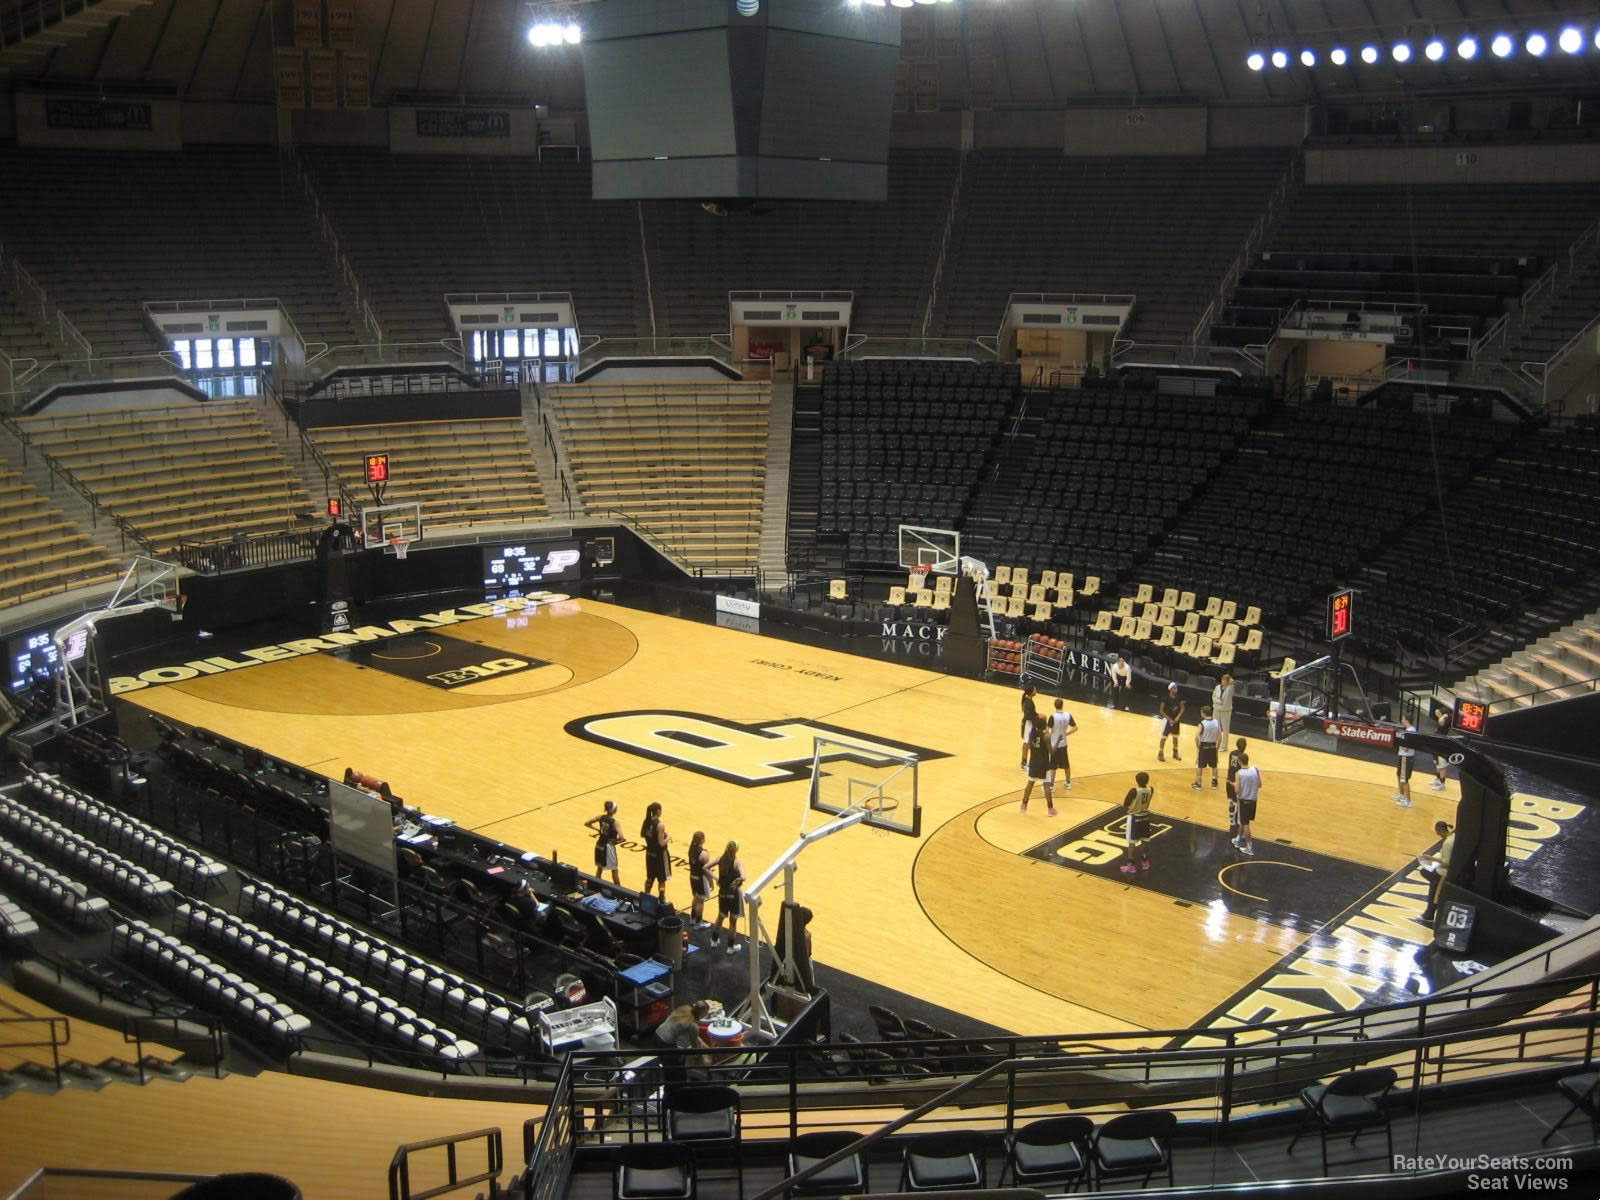 section 118, row 10 seat view  - mackey arena